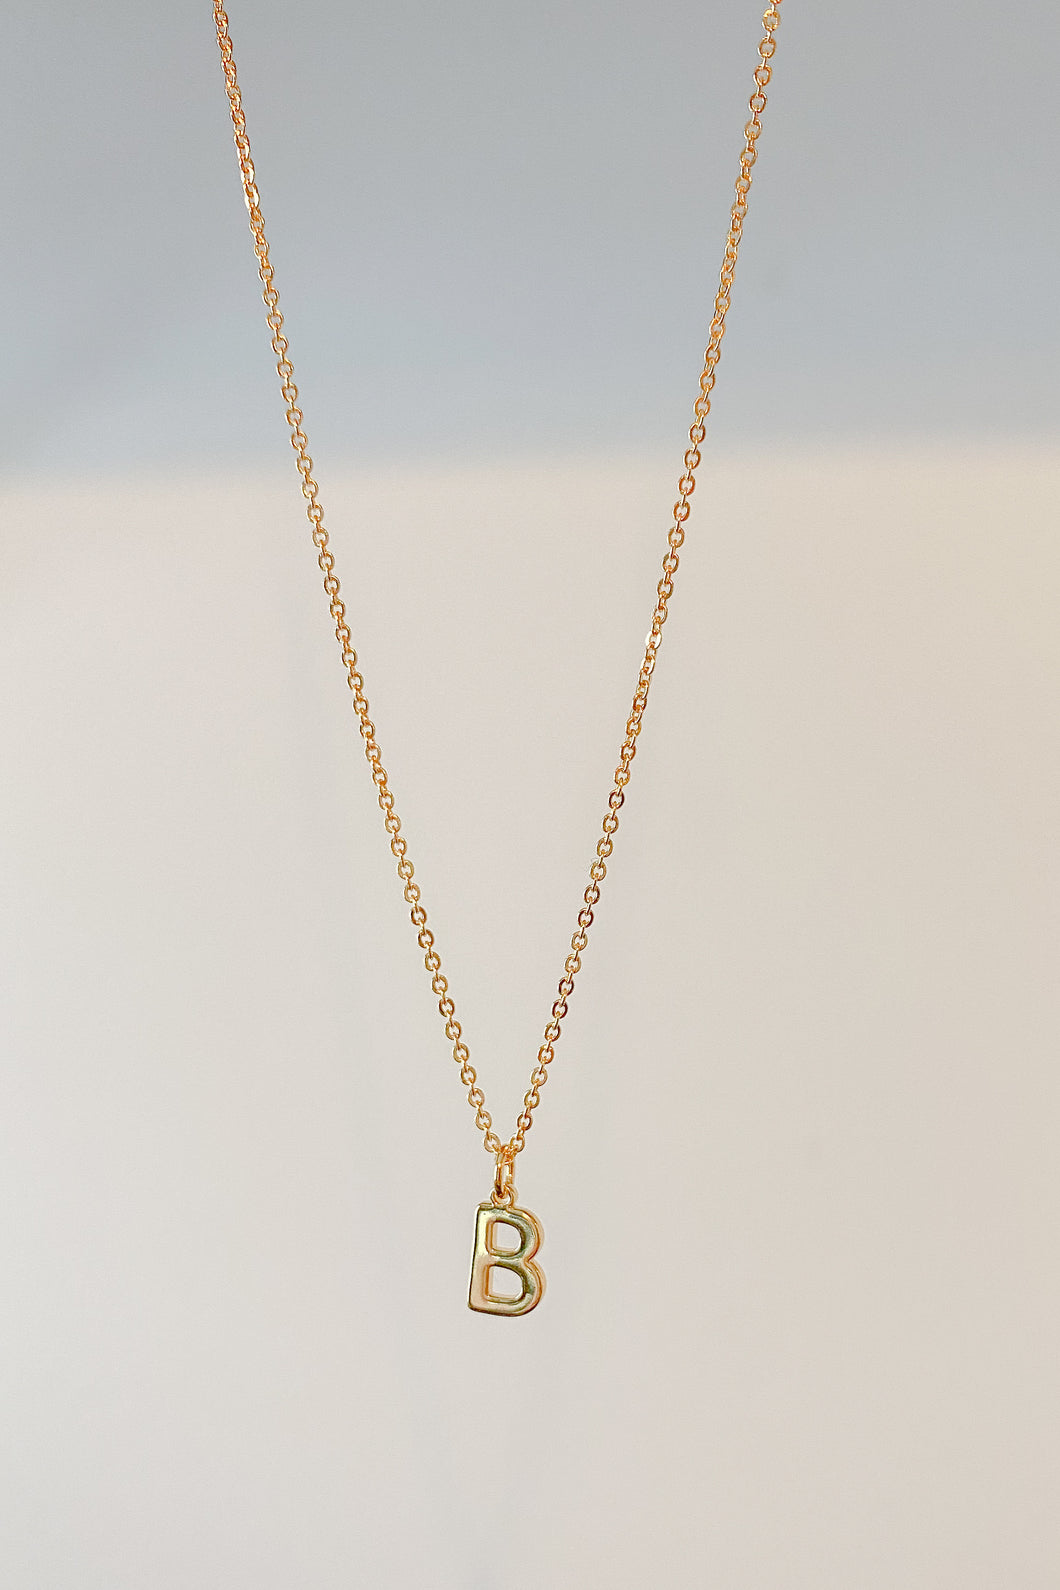 Gold initial charm necklace